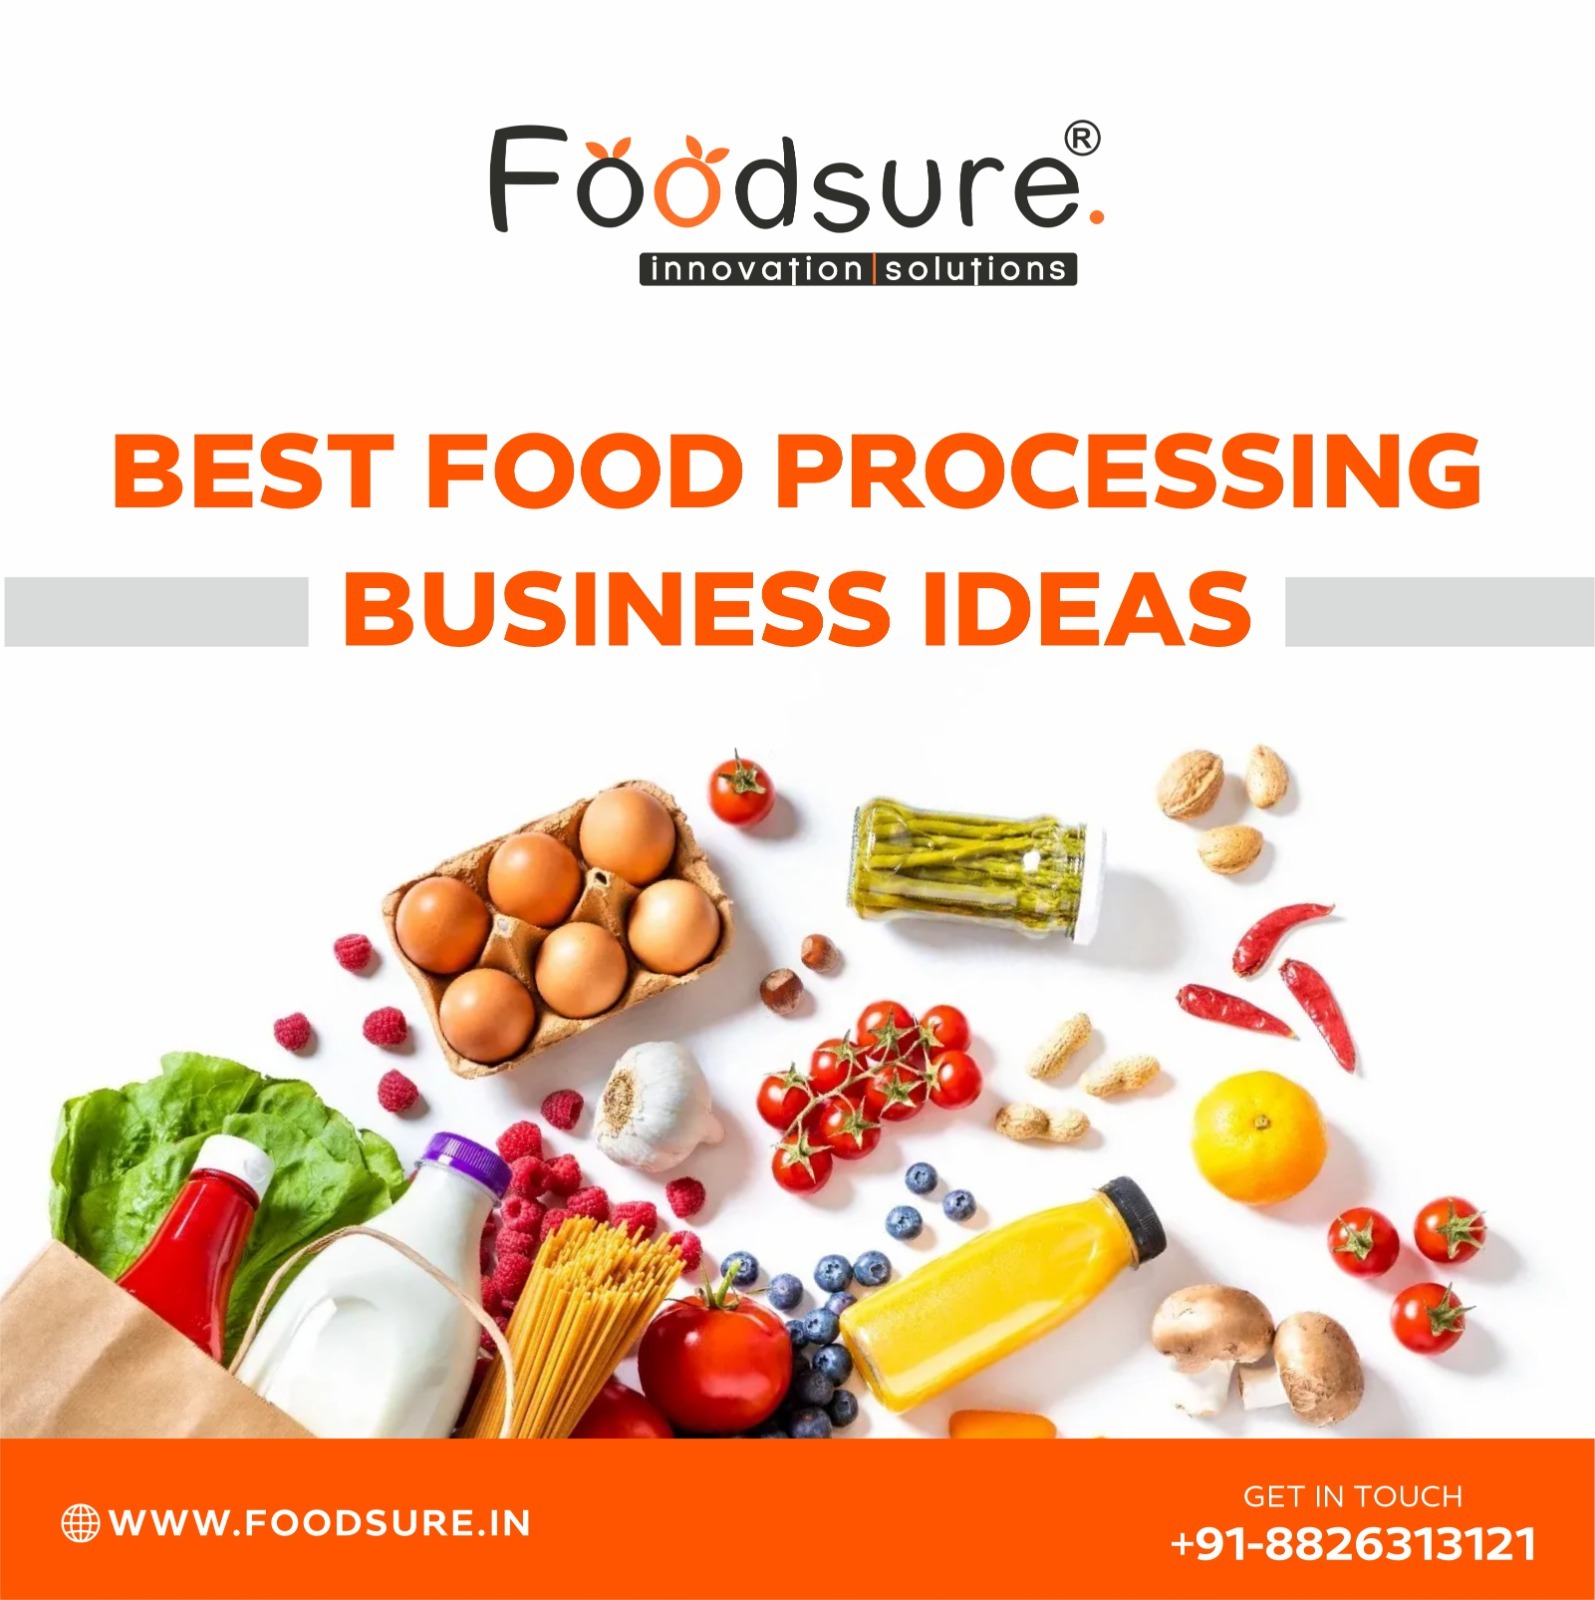 Food Consultant Services